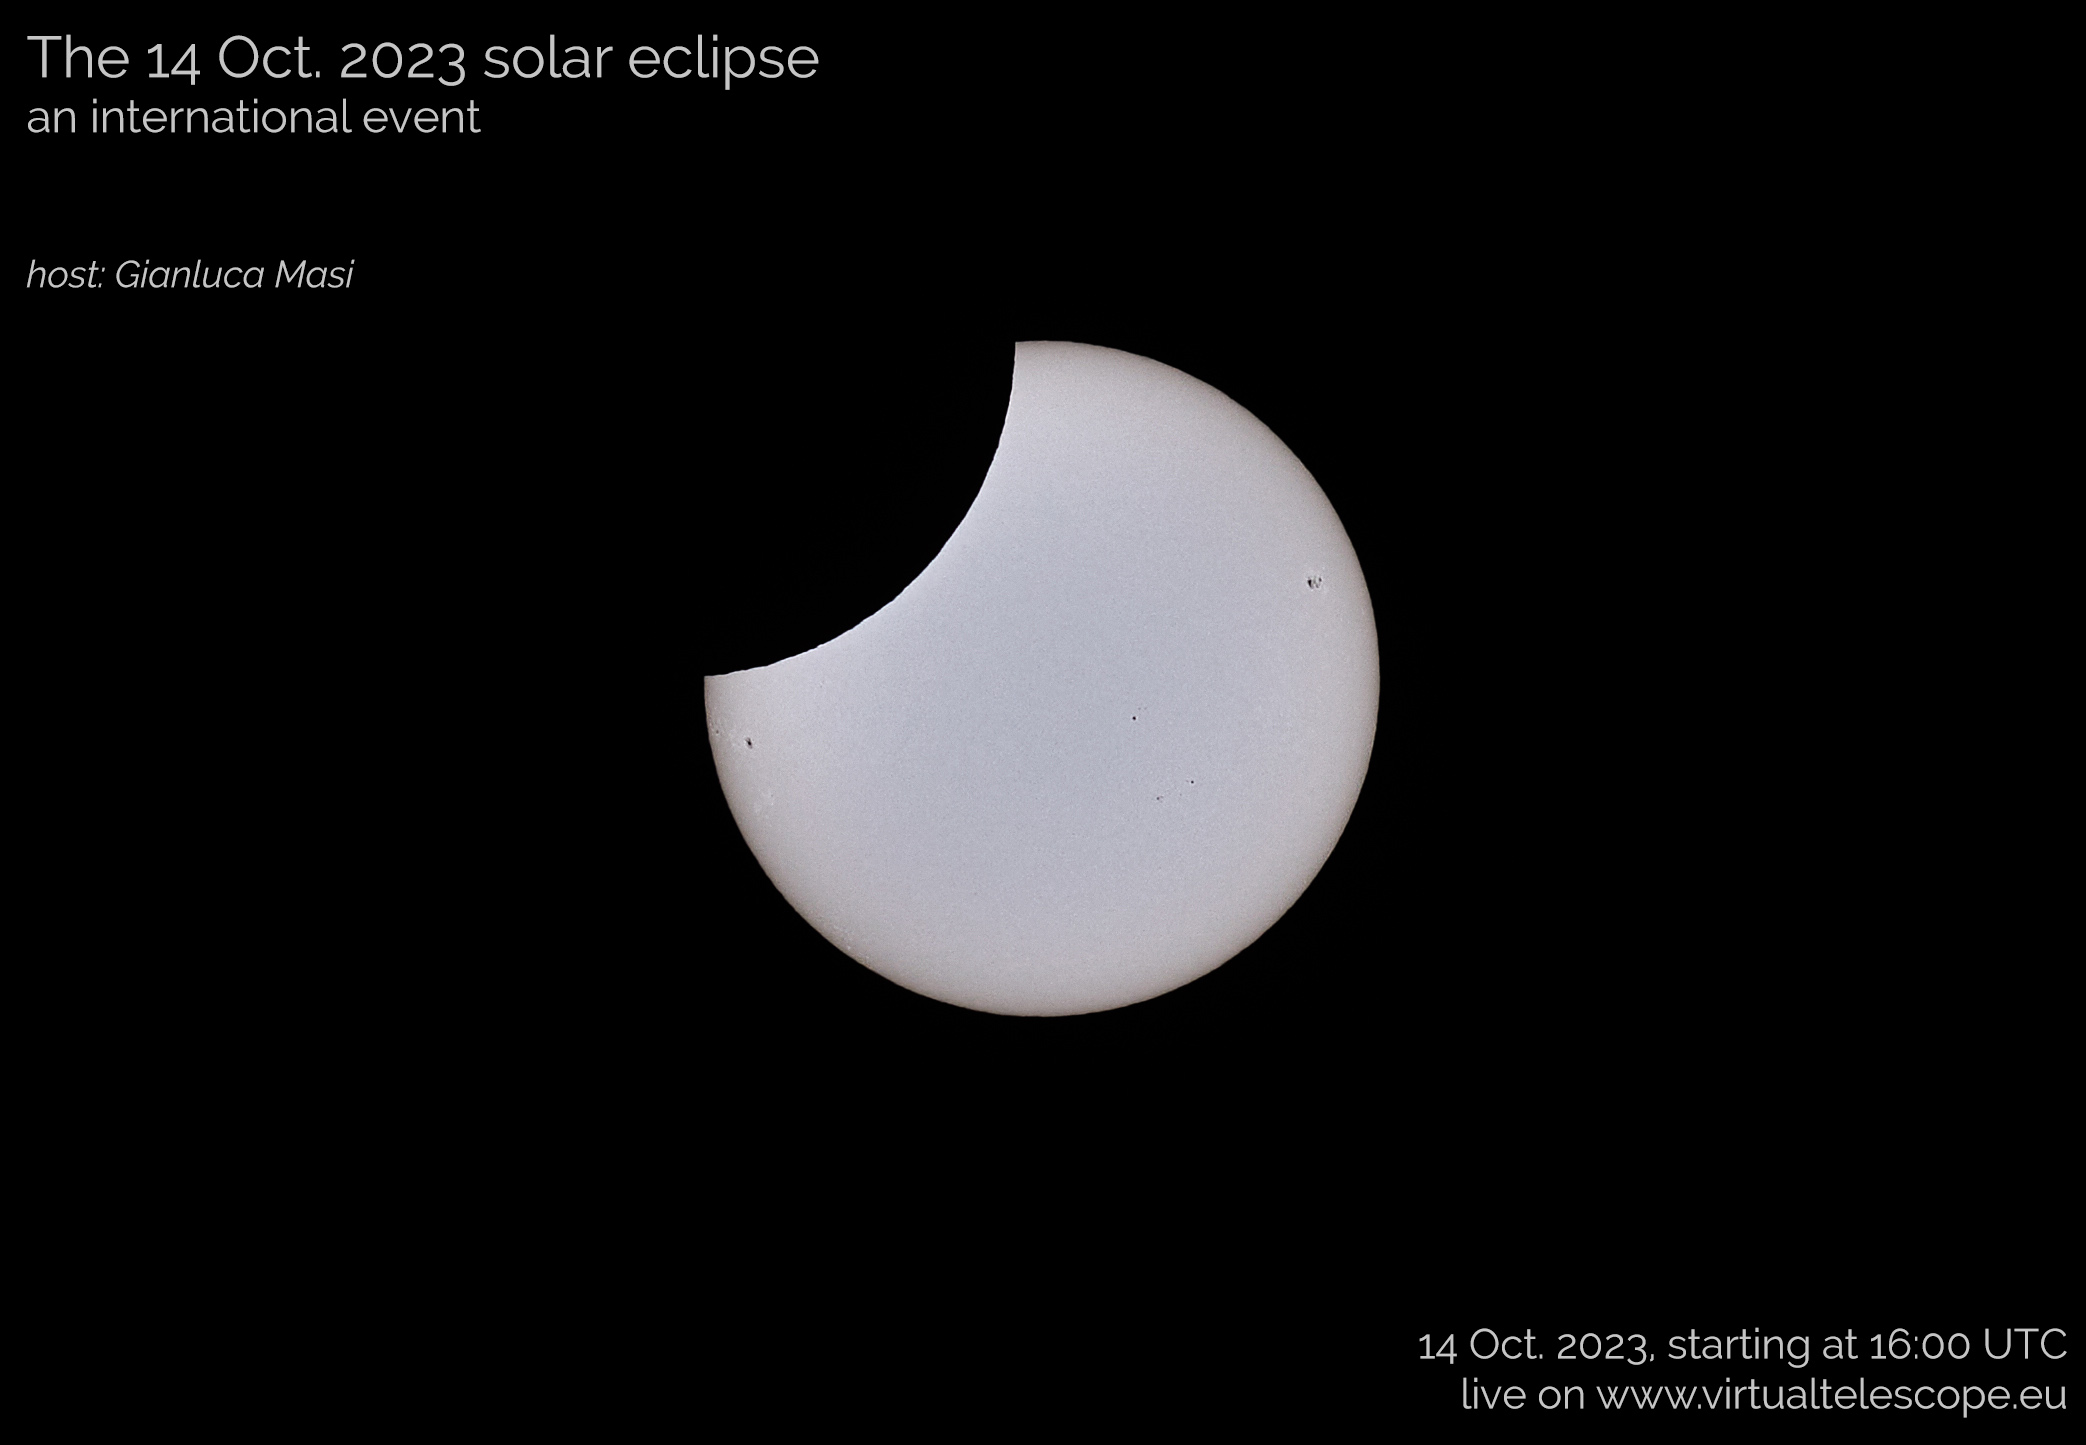 The 14 Oct. 2023 annular solar eclipse: poster of the event